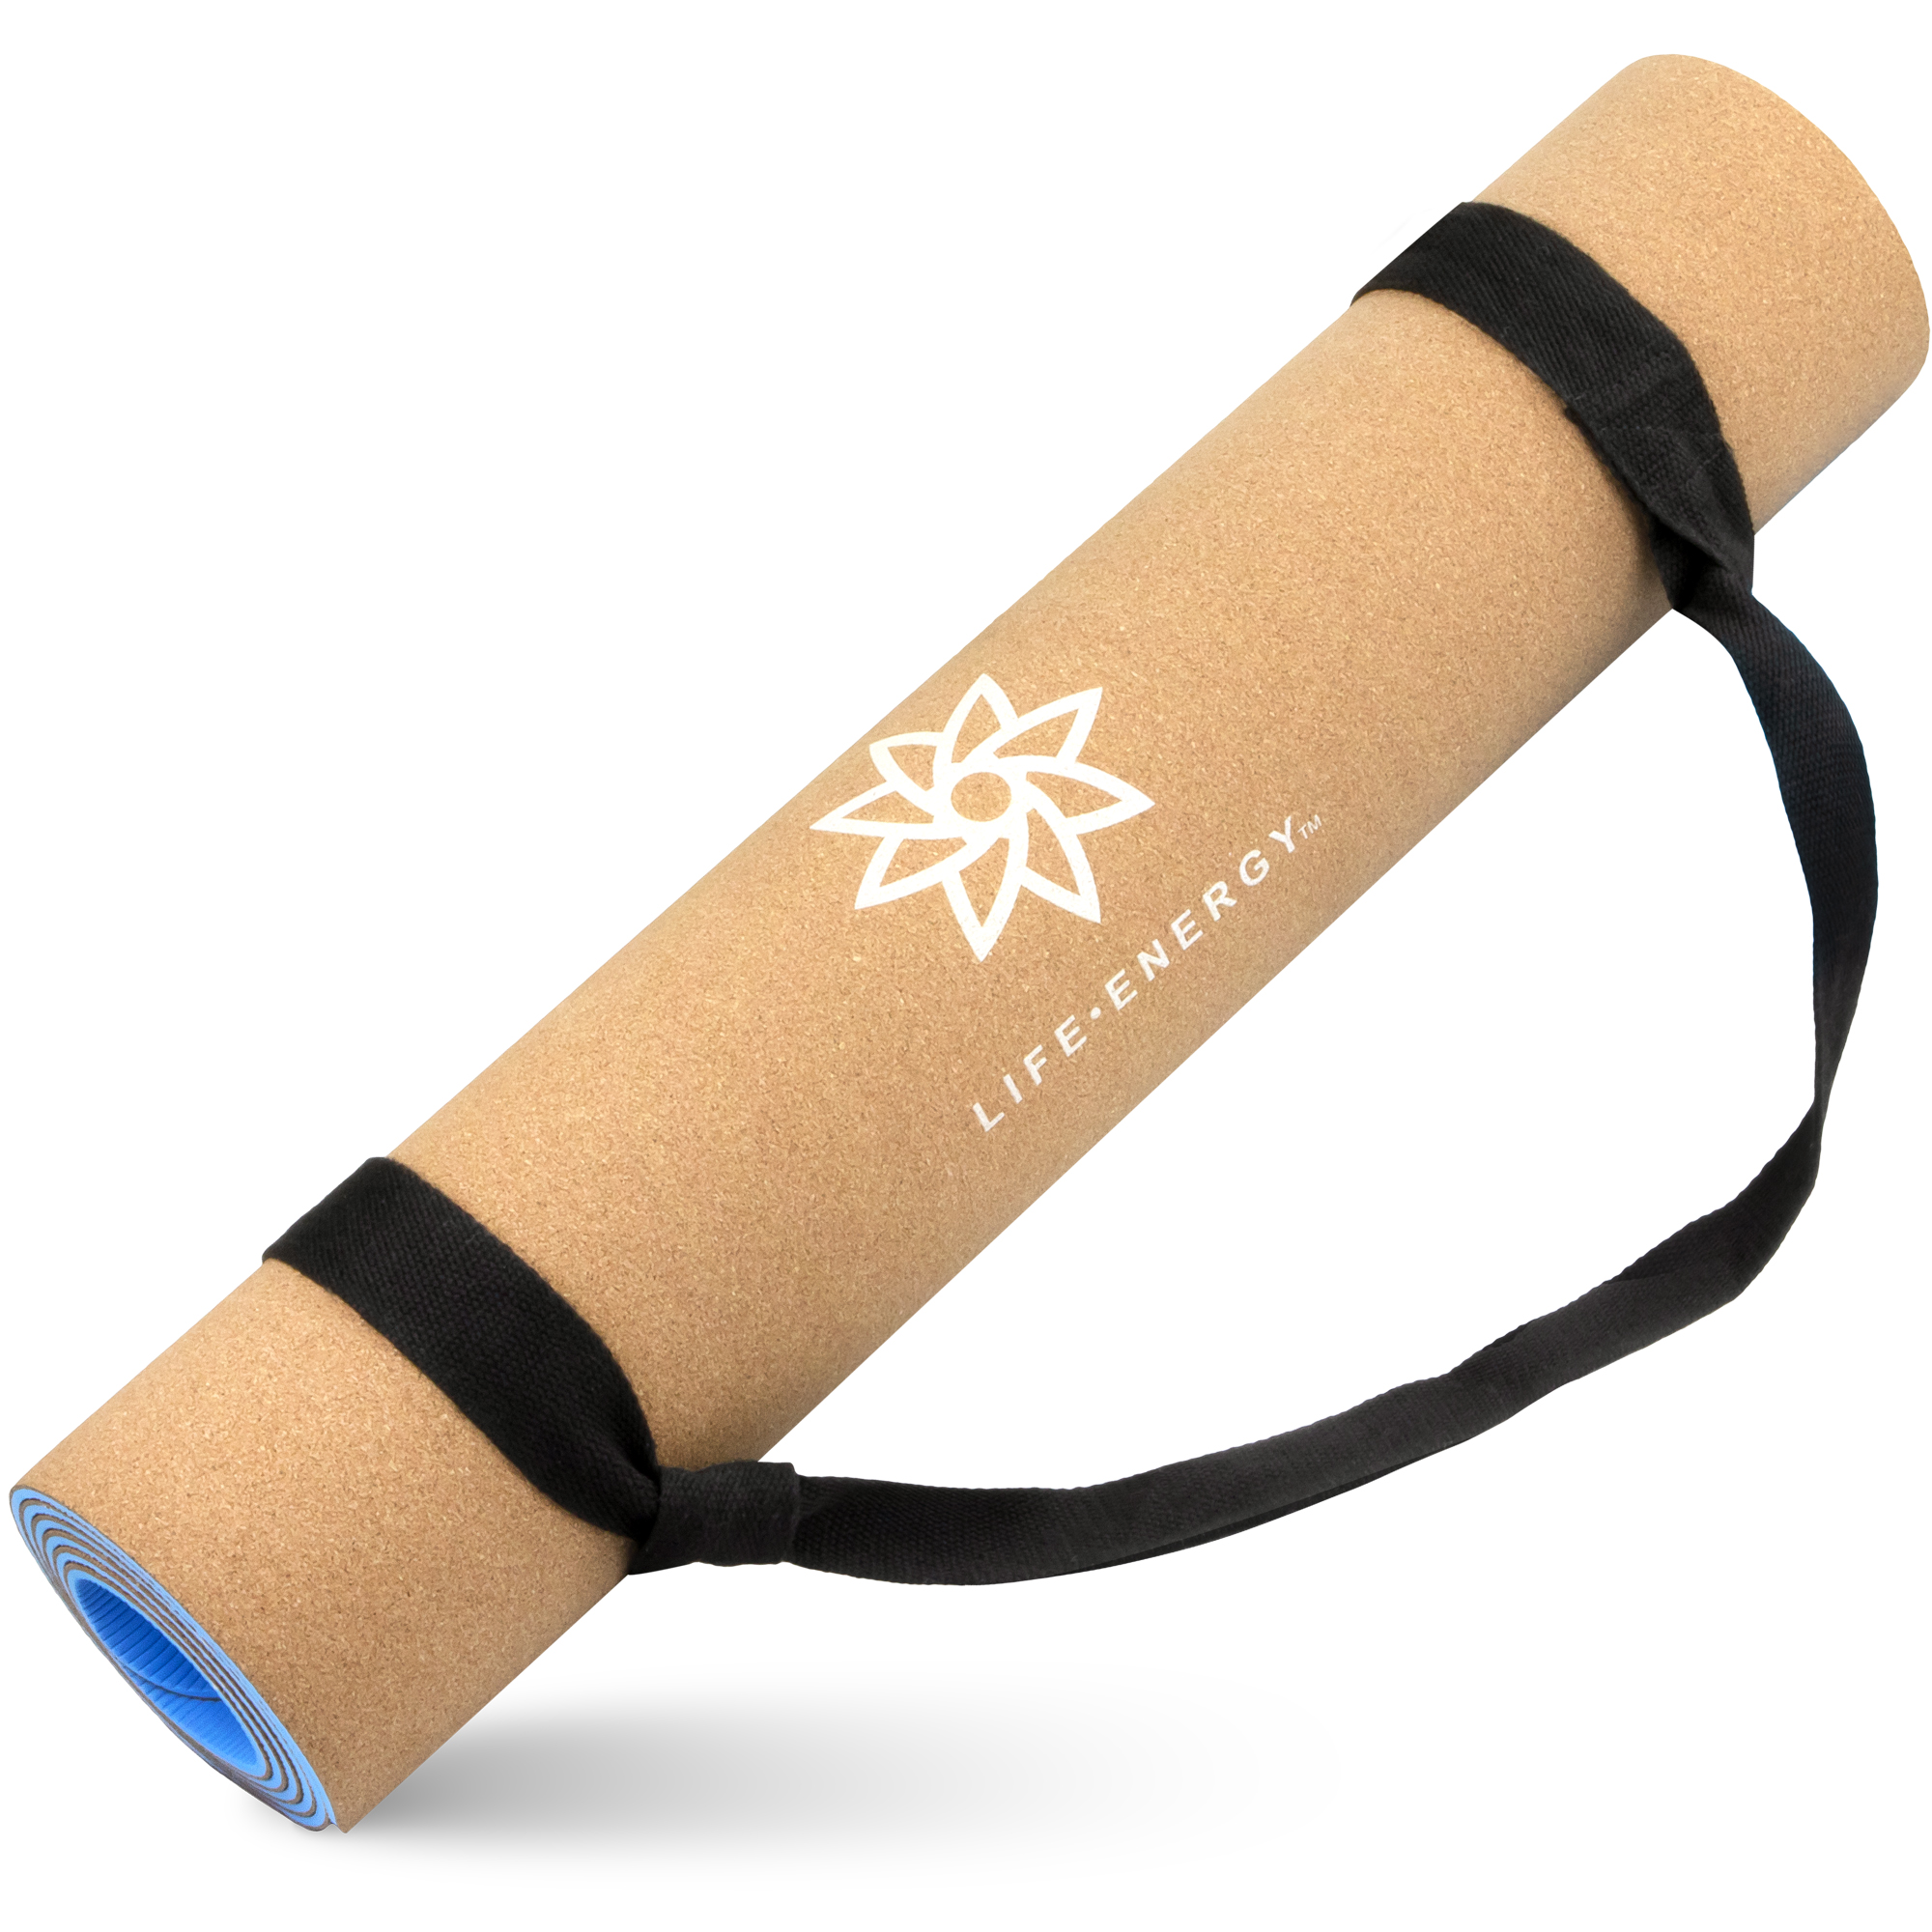 Life Energy 5mm Thick, EkoSmart Non-Slip Cork Yoga Mat with Carry Strap - image 1 of 7